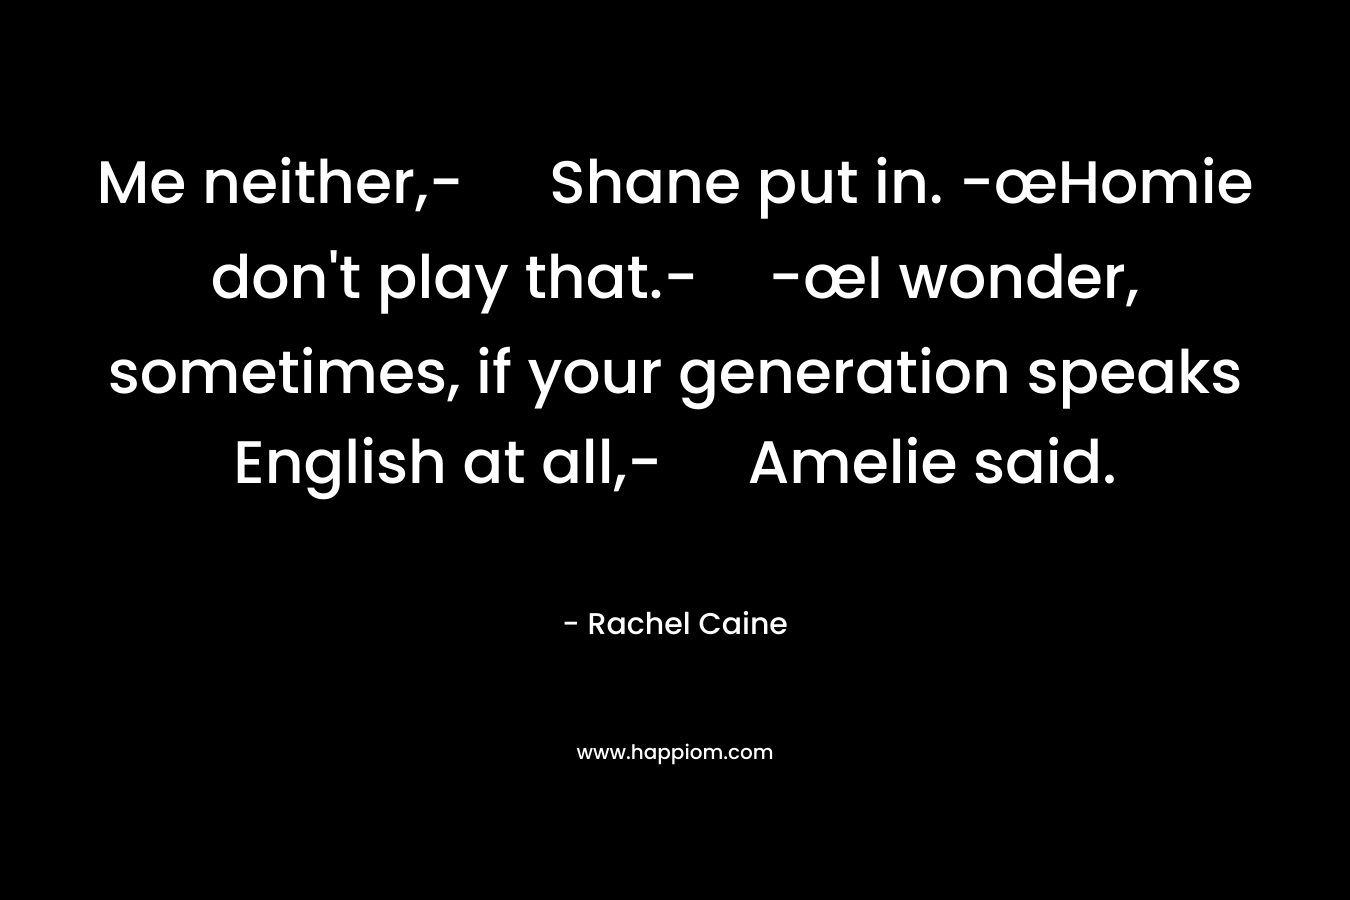 Me neither,- Shane put in. -œHomie don't play that.--œI wonder, sometimes, if your generation speaks English at all,- Amelie said.